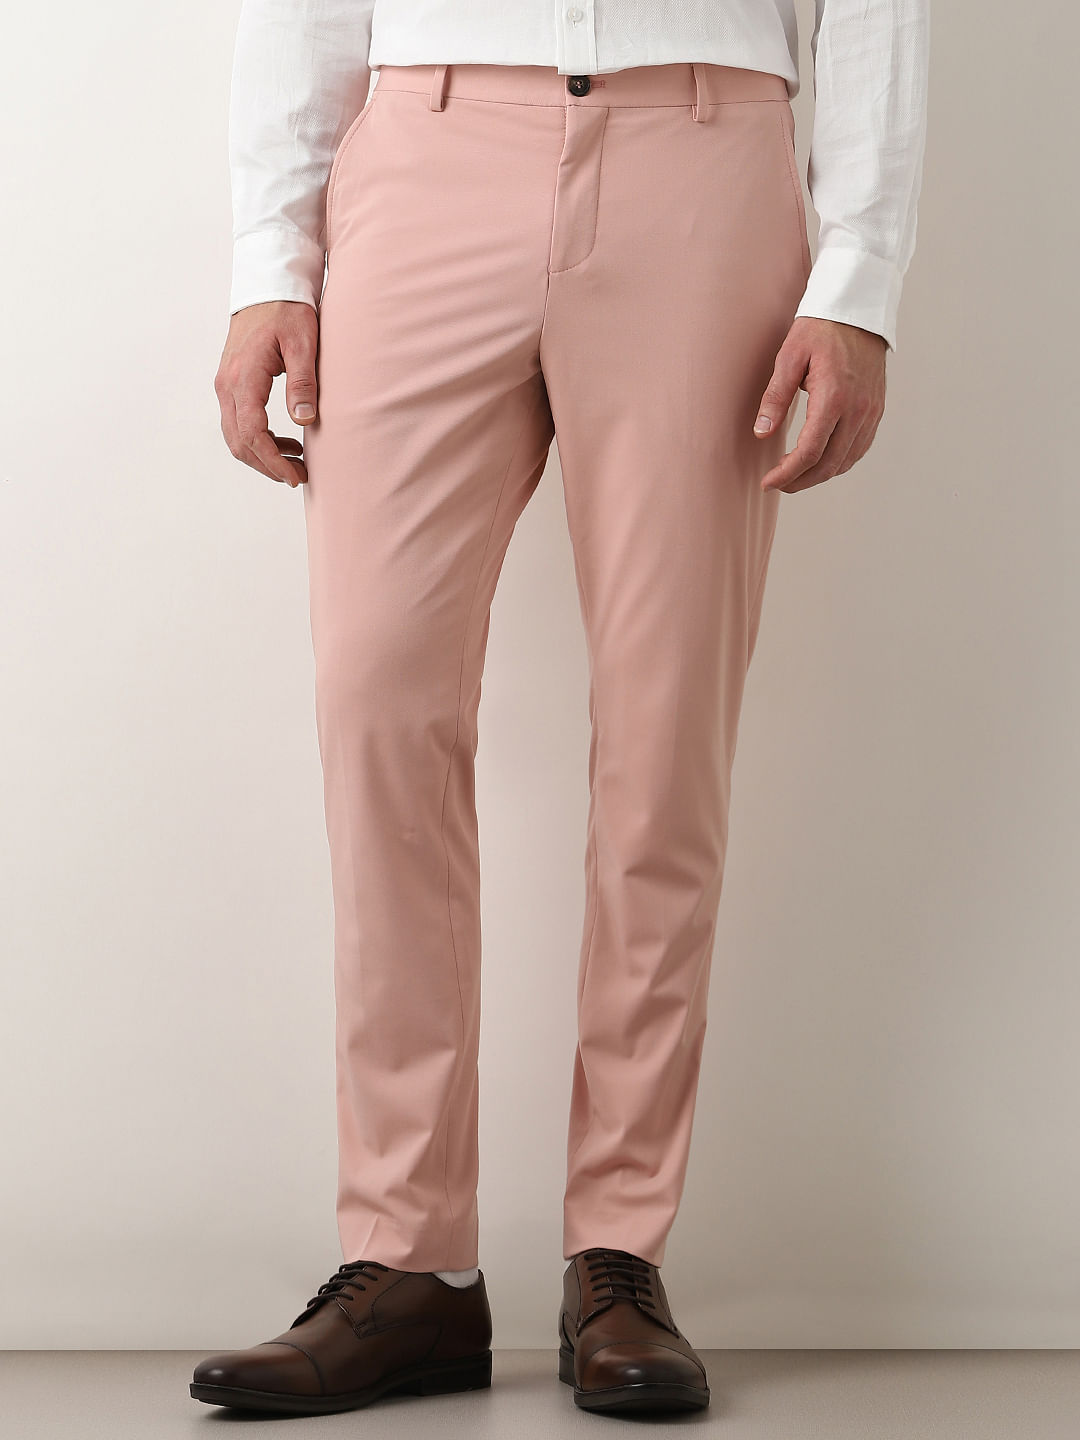 Formal Pleated Trousers - Buy Formal Pleated Trousers online in India